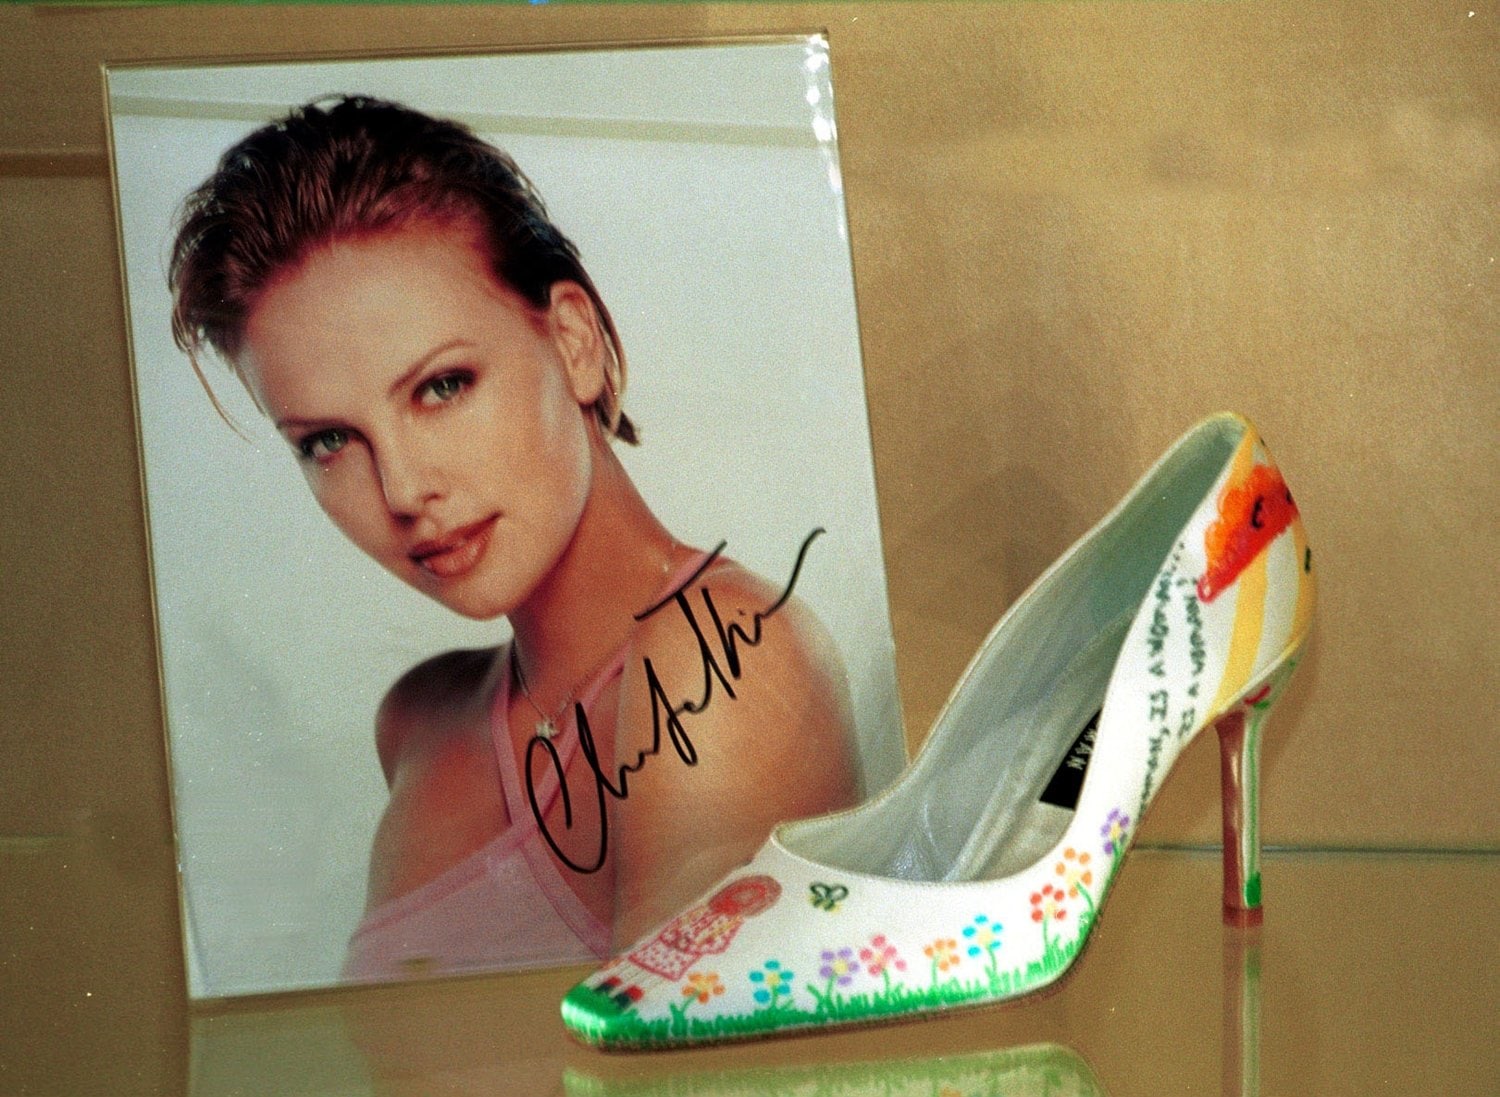 A Stuart Weitzman shoe decorated by Charlize Theron for charity